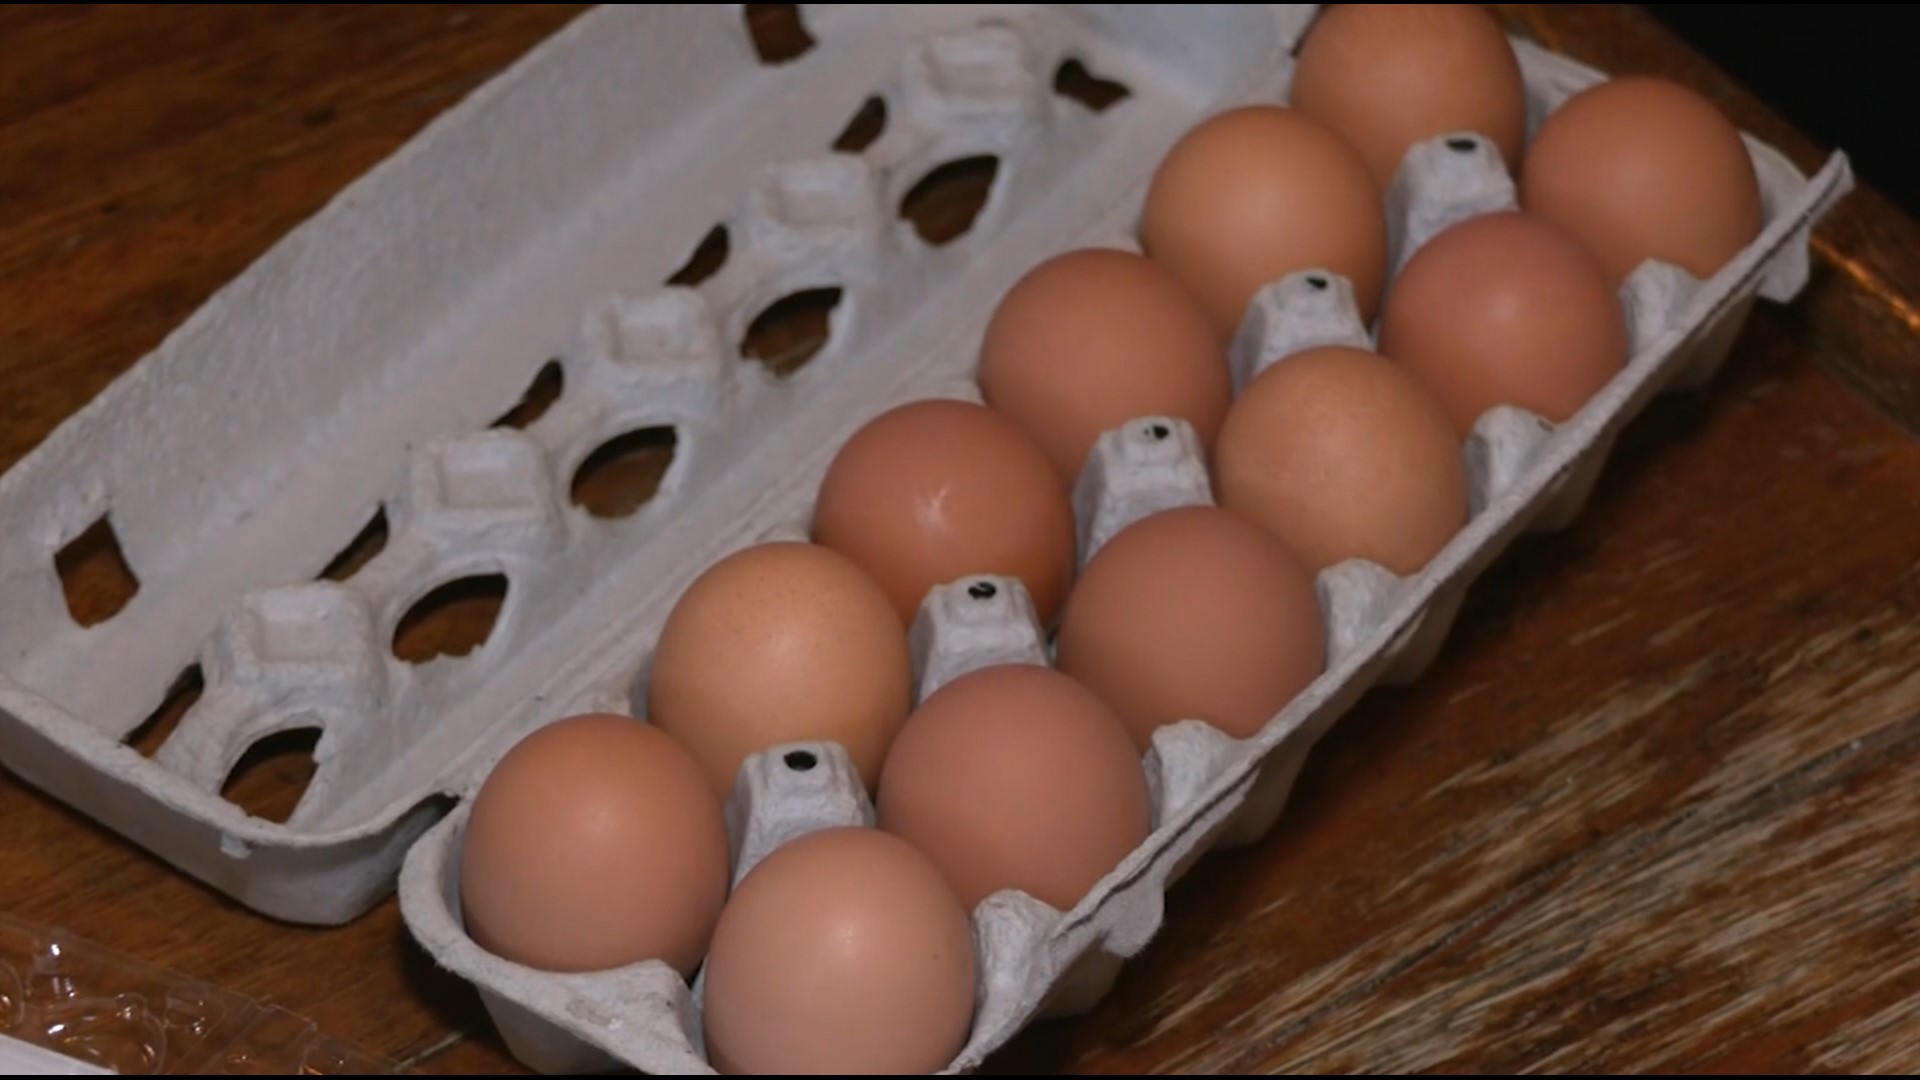 High egg prices are not only impacting consumers but also businesses.